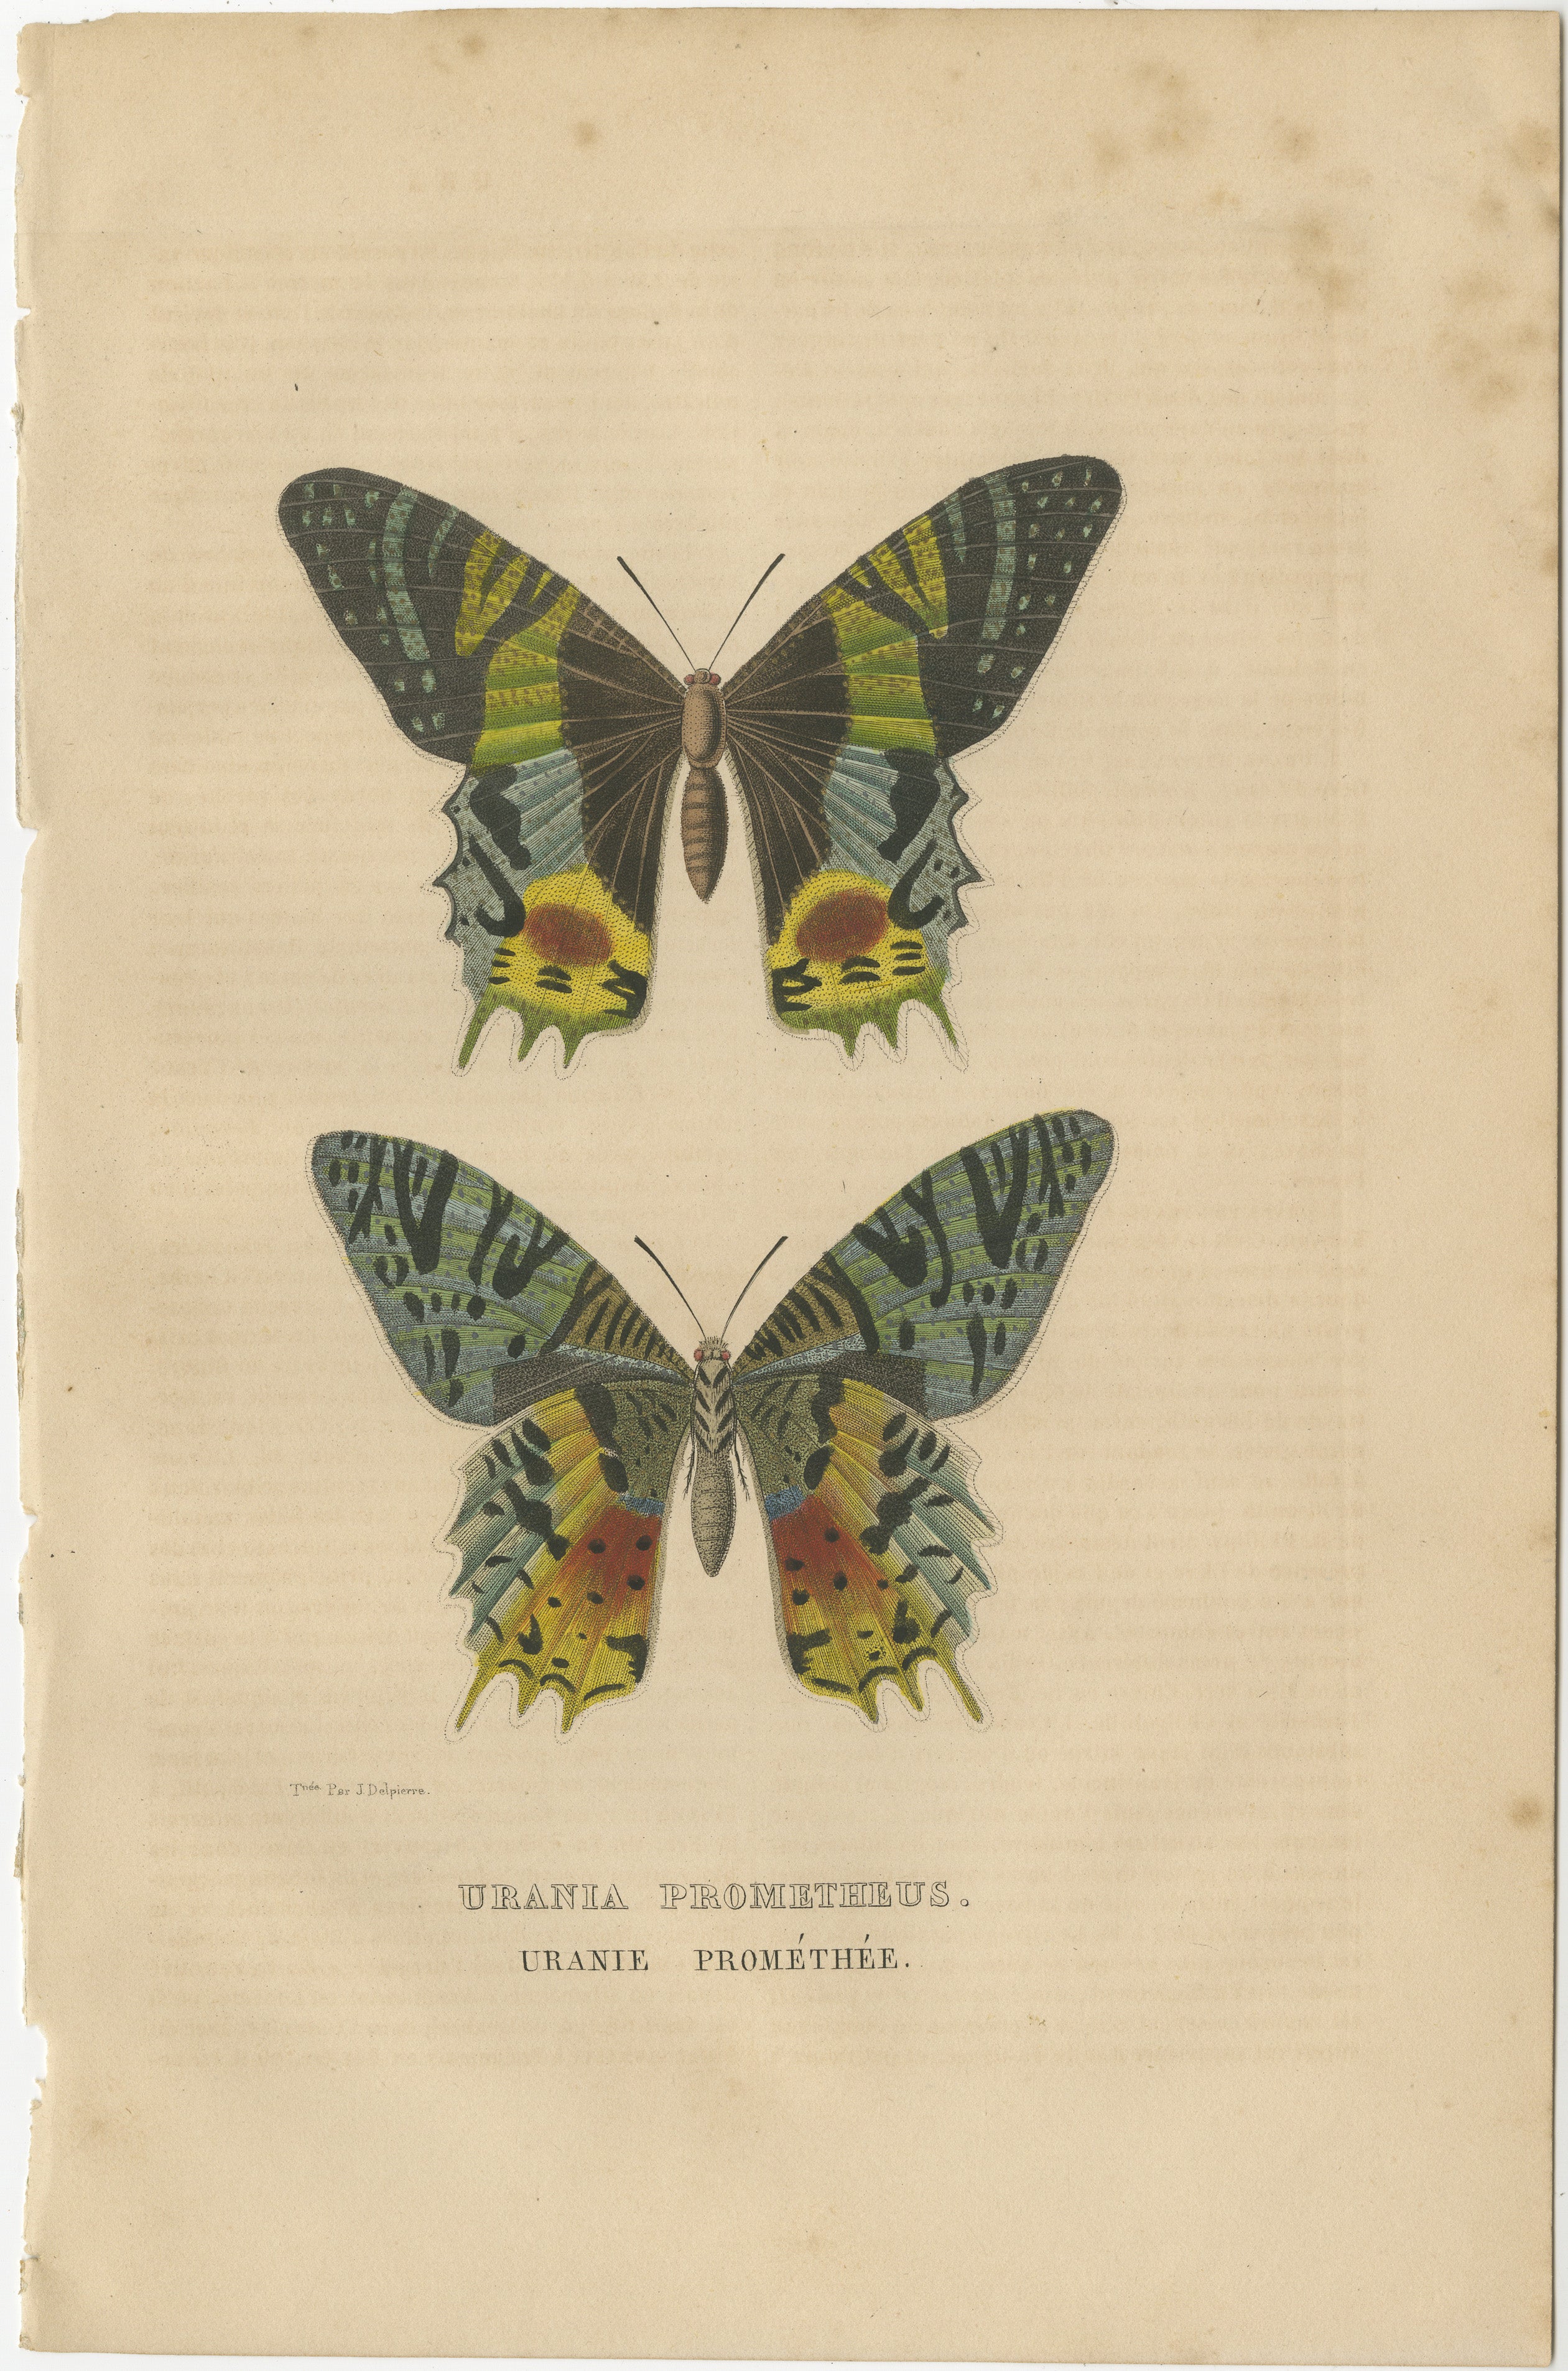 This original antique print of the butterfly 